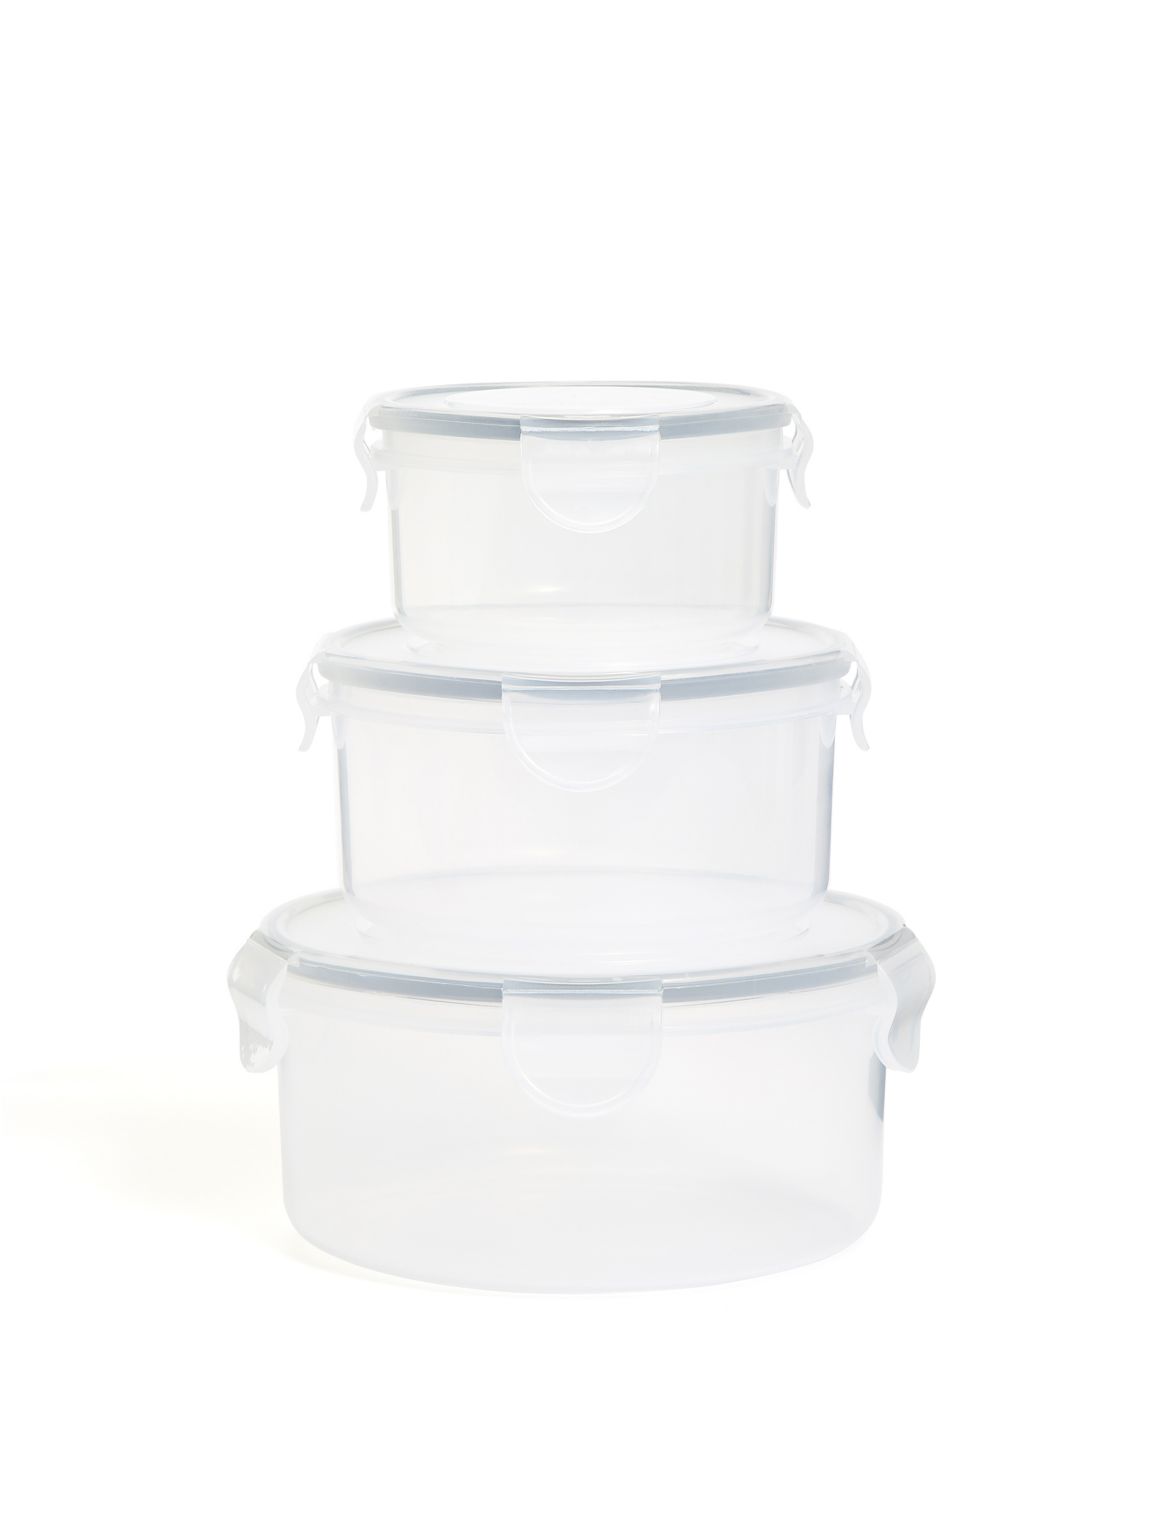 Set of 3 Round Clip Storage Containers grey